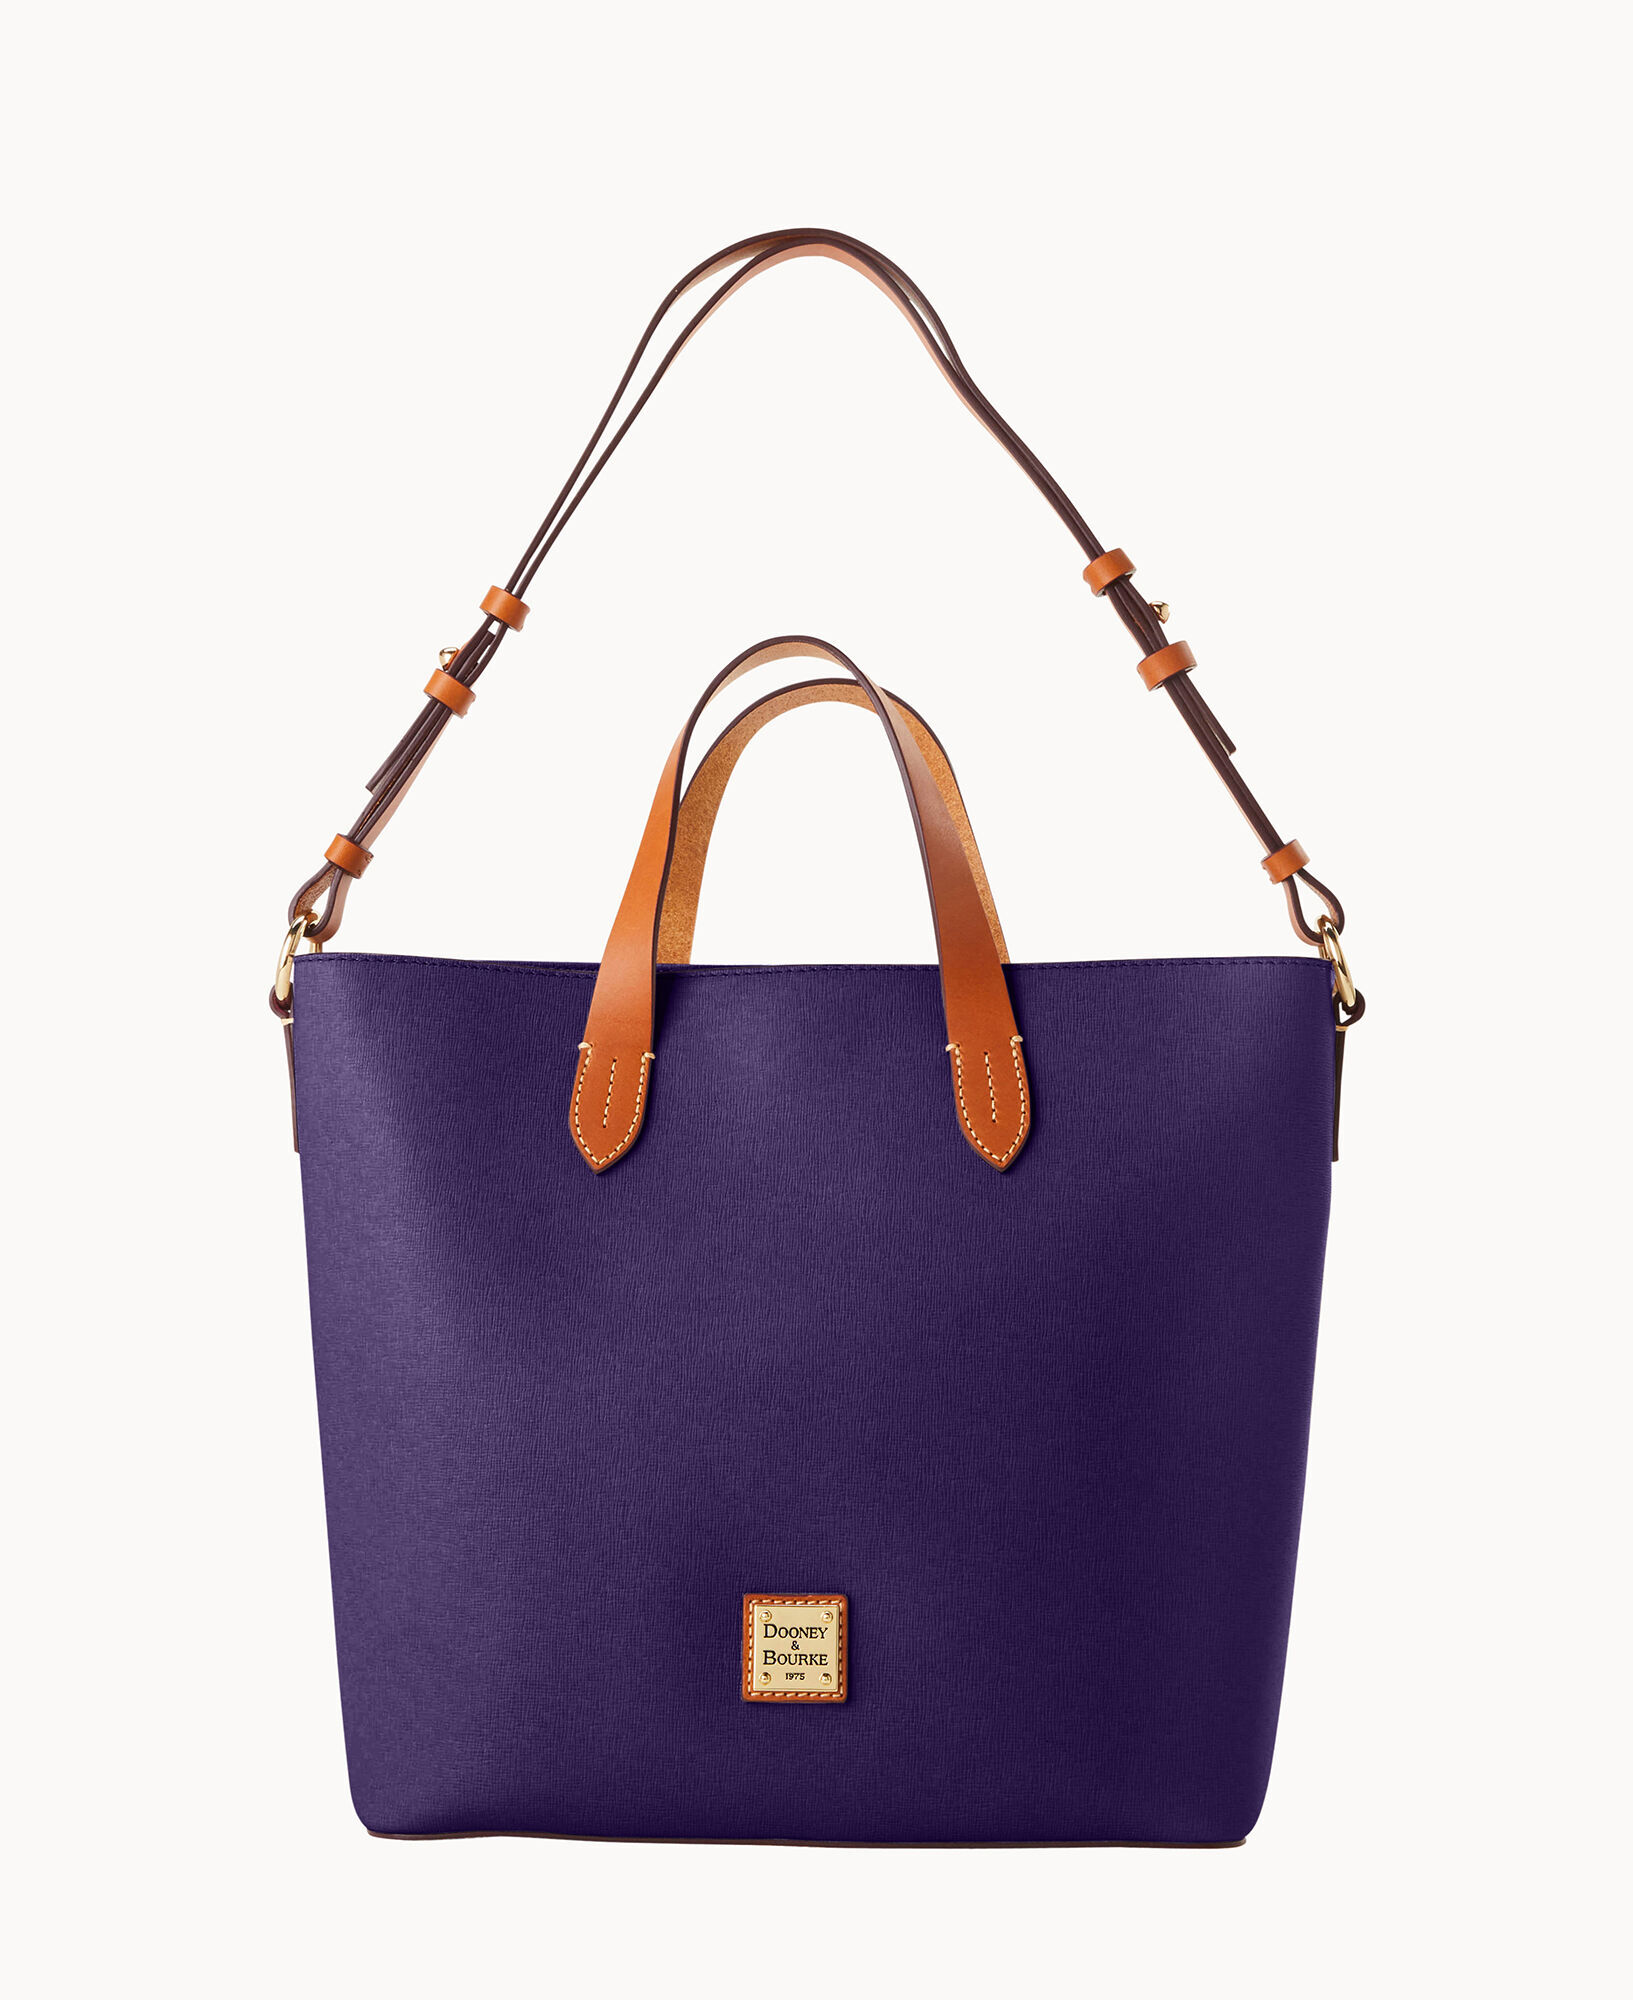 bourke outlet discontinued dooney and bourke older styles